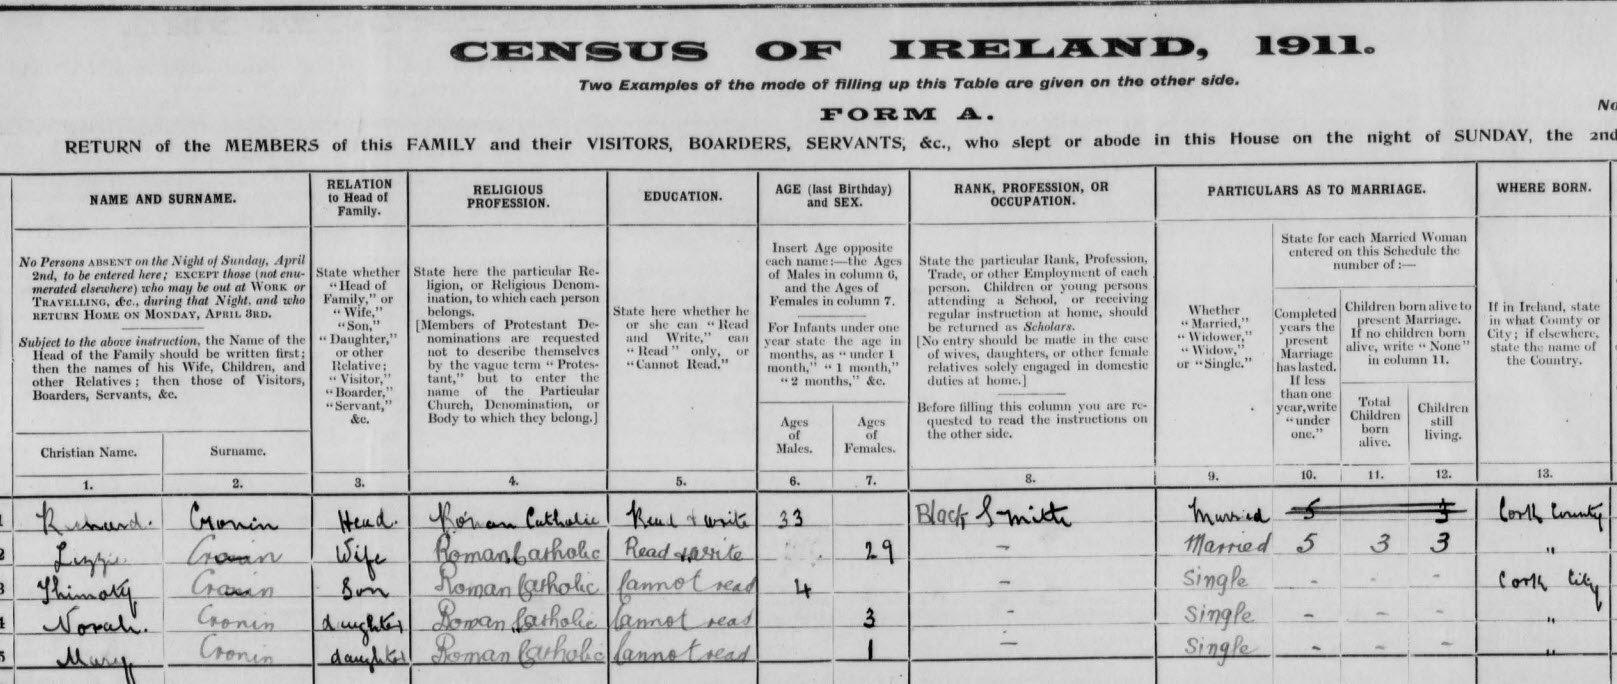 Richard, a blacksmith, appeared in the 1911 census with his family in Cork.